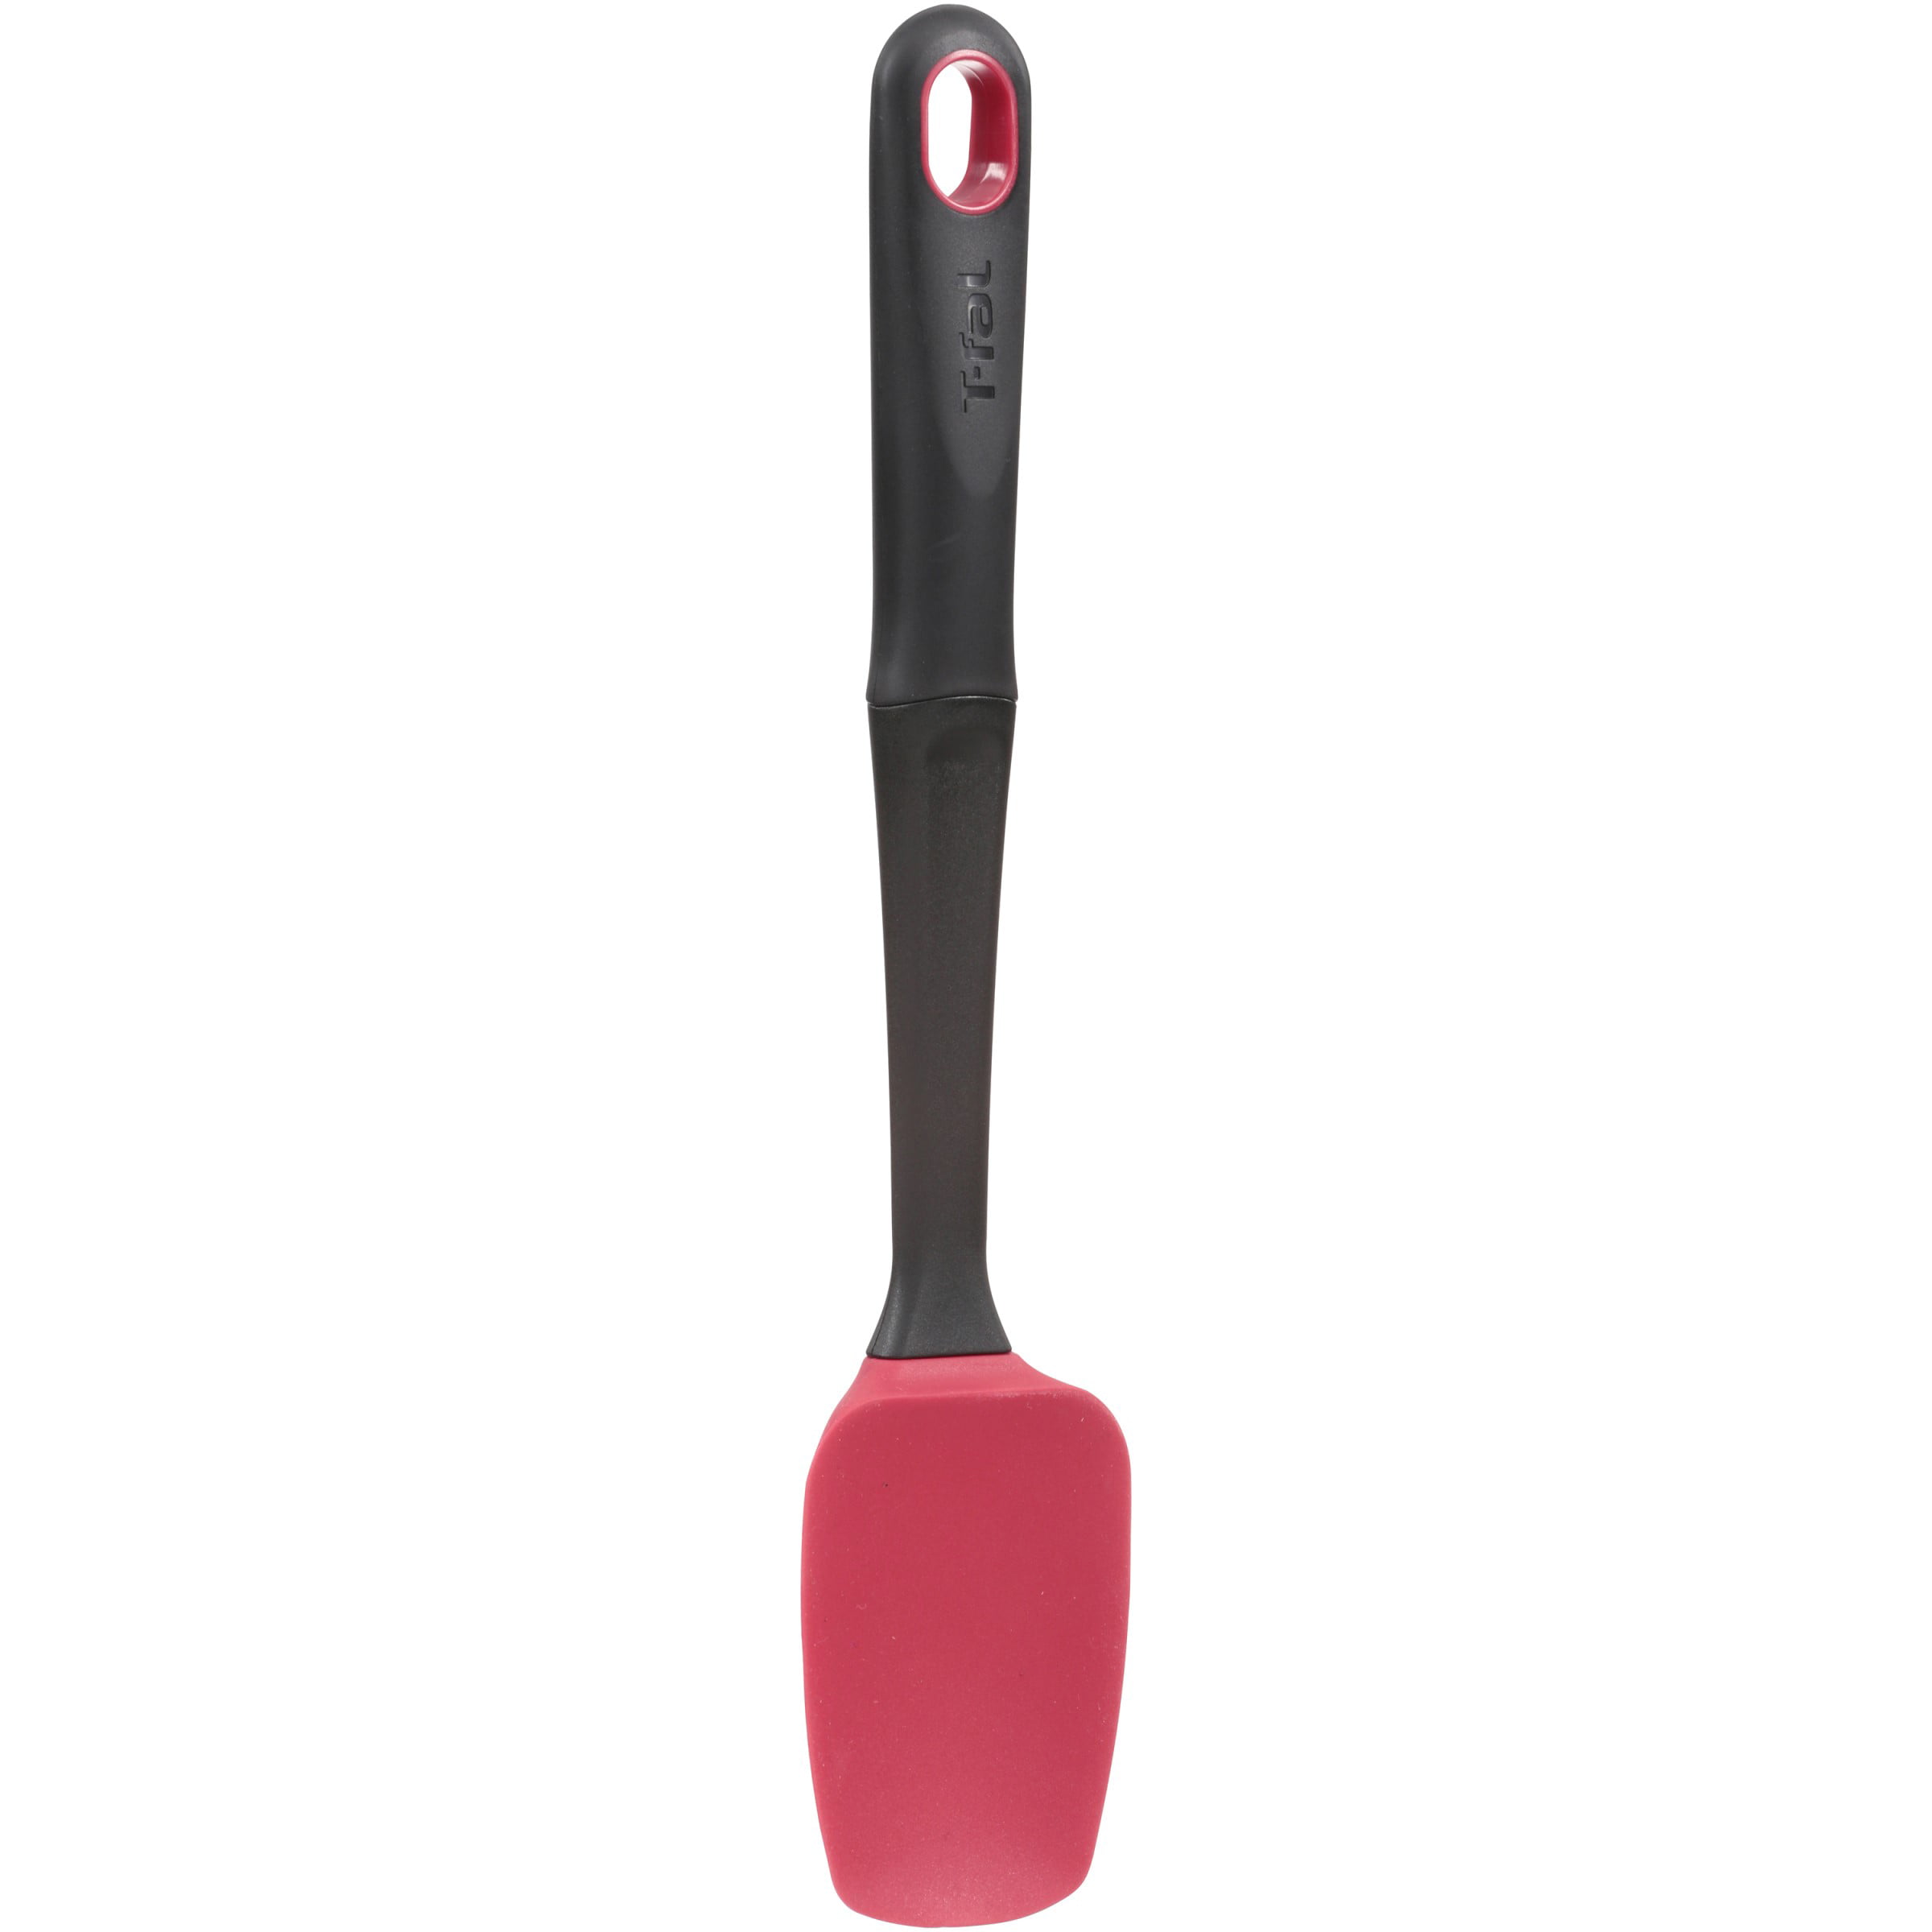 Restaurantware 10.6 inch x 2.2 inch Silicone Spatula, 1 Flat Flexible Spatula - Dishwasher-Safe, withstands Heat Up to 570F, Black Silicone Mixing